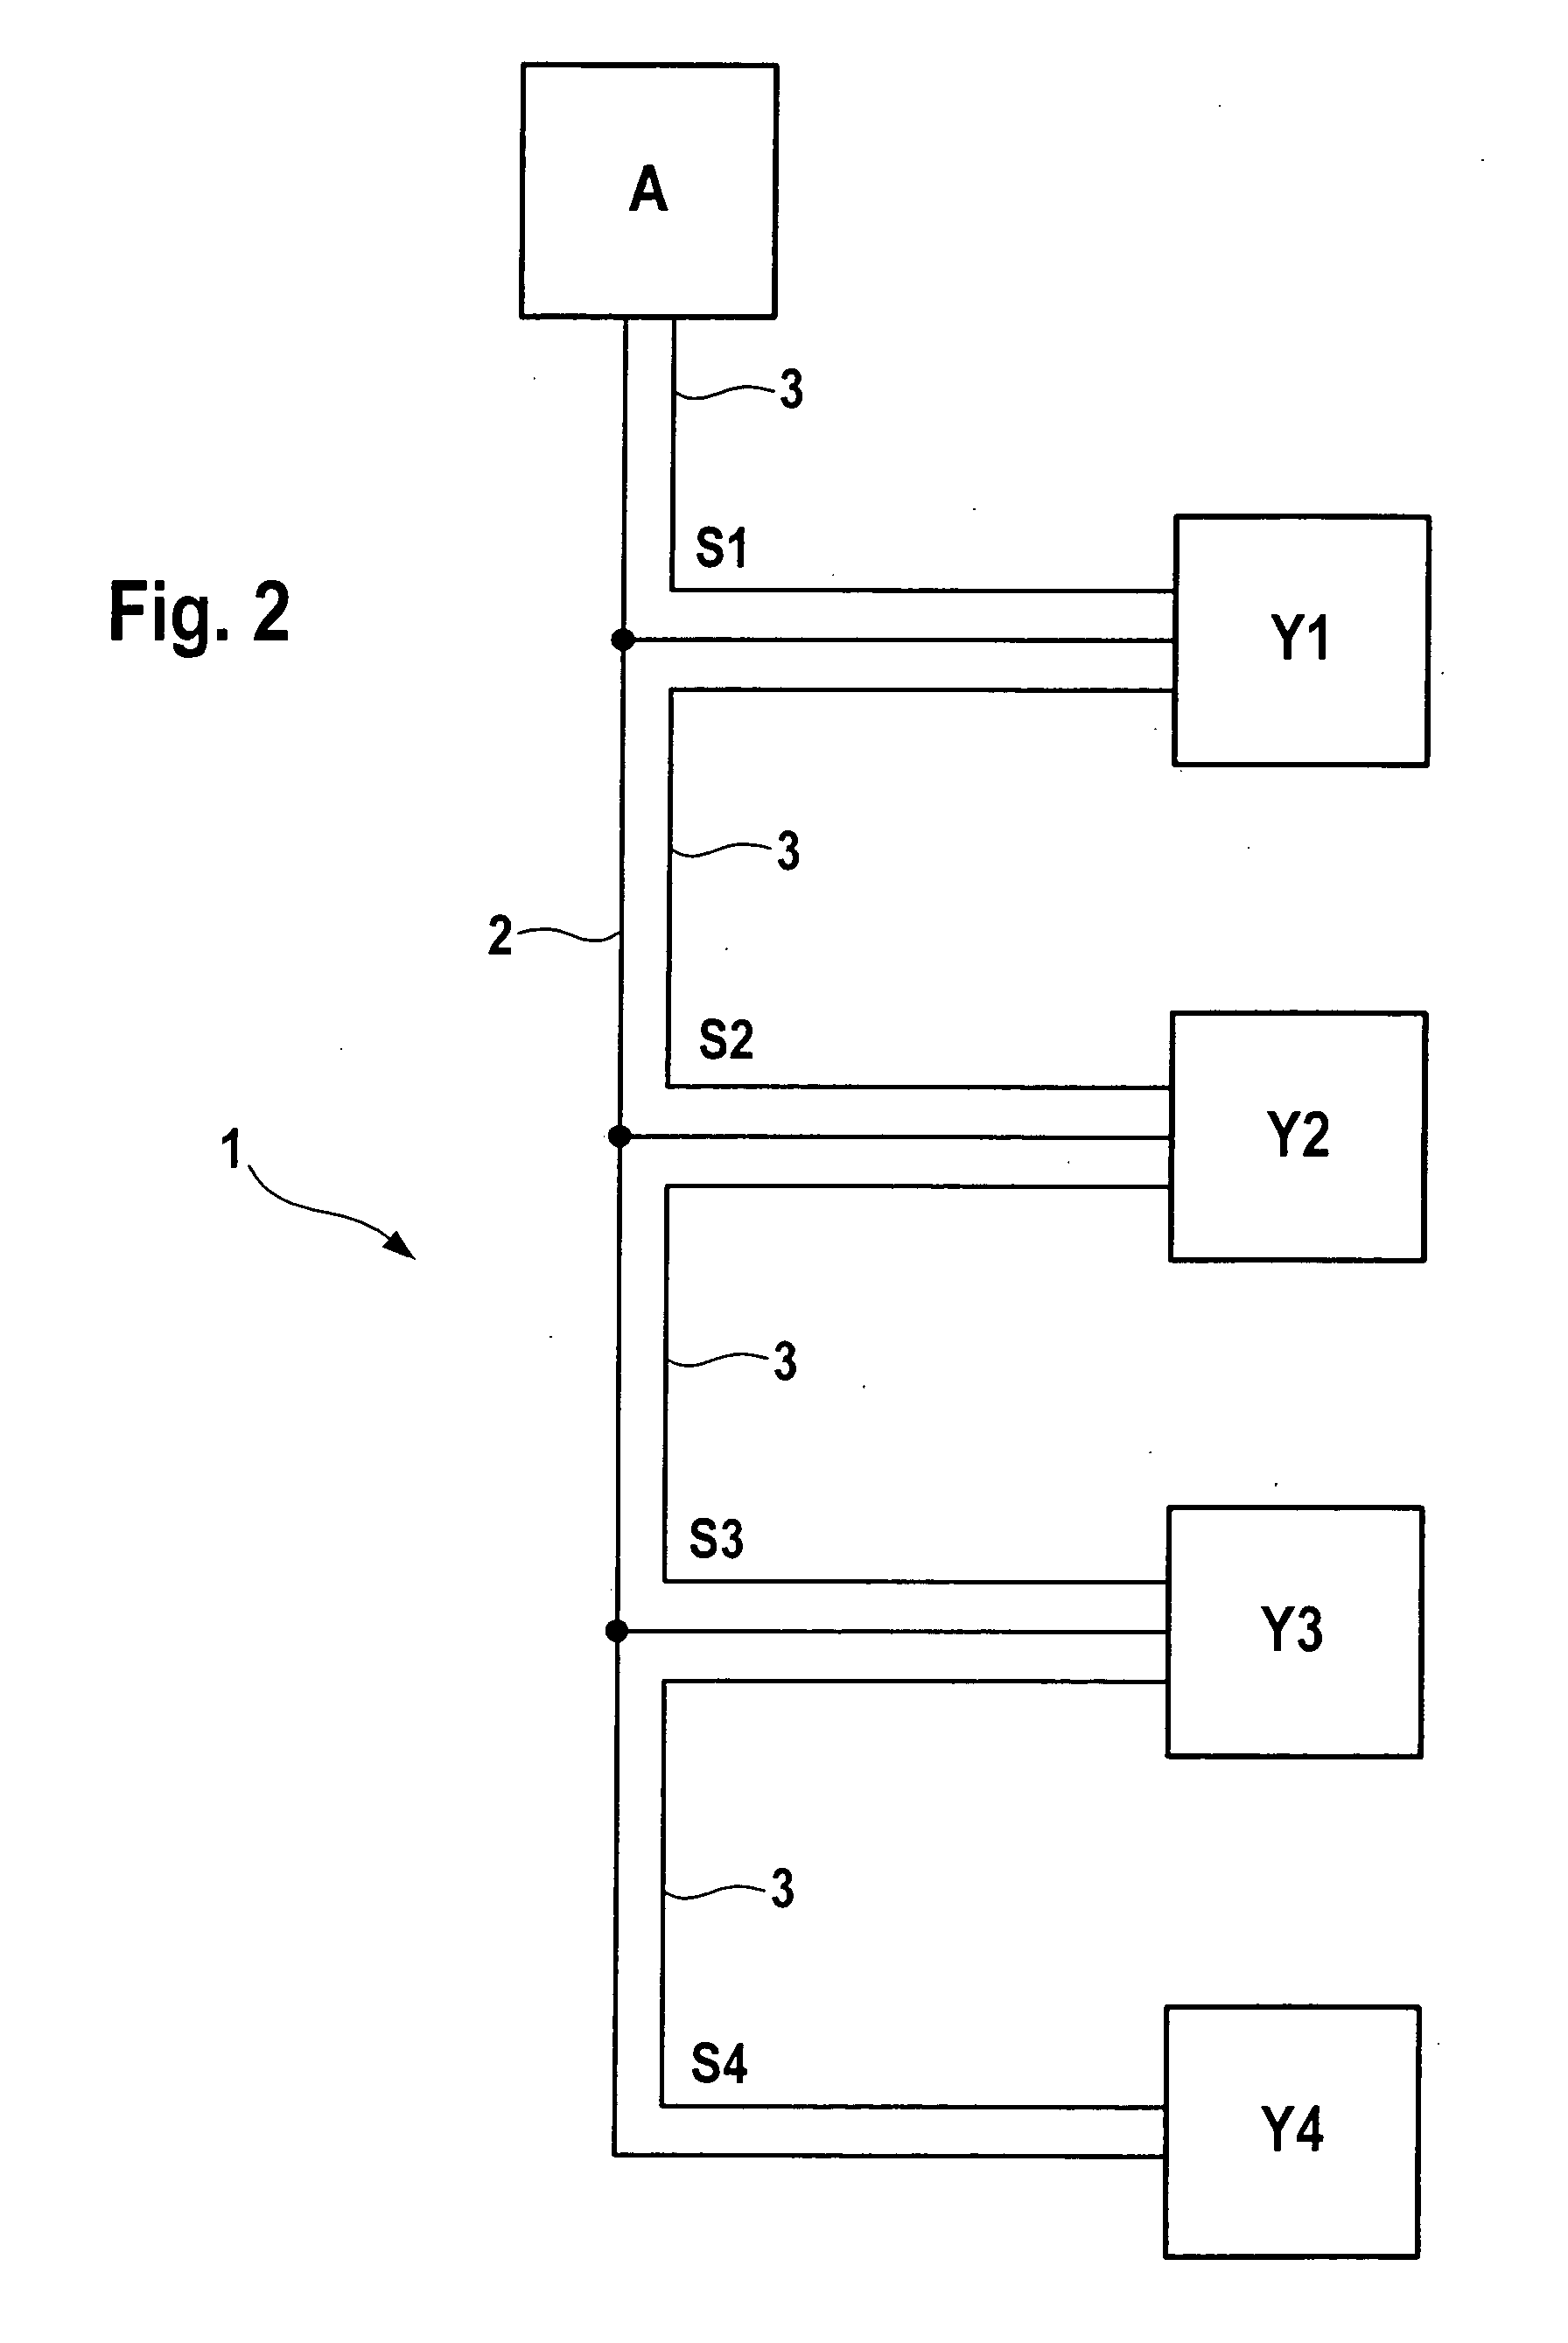 Method for operating a plurality of subscribers connected to a serial bus